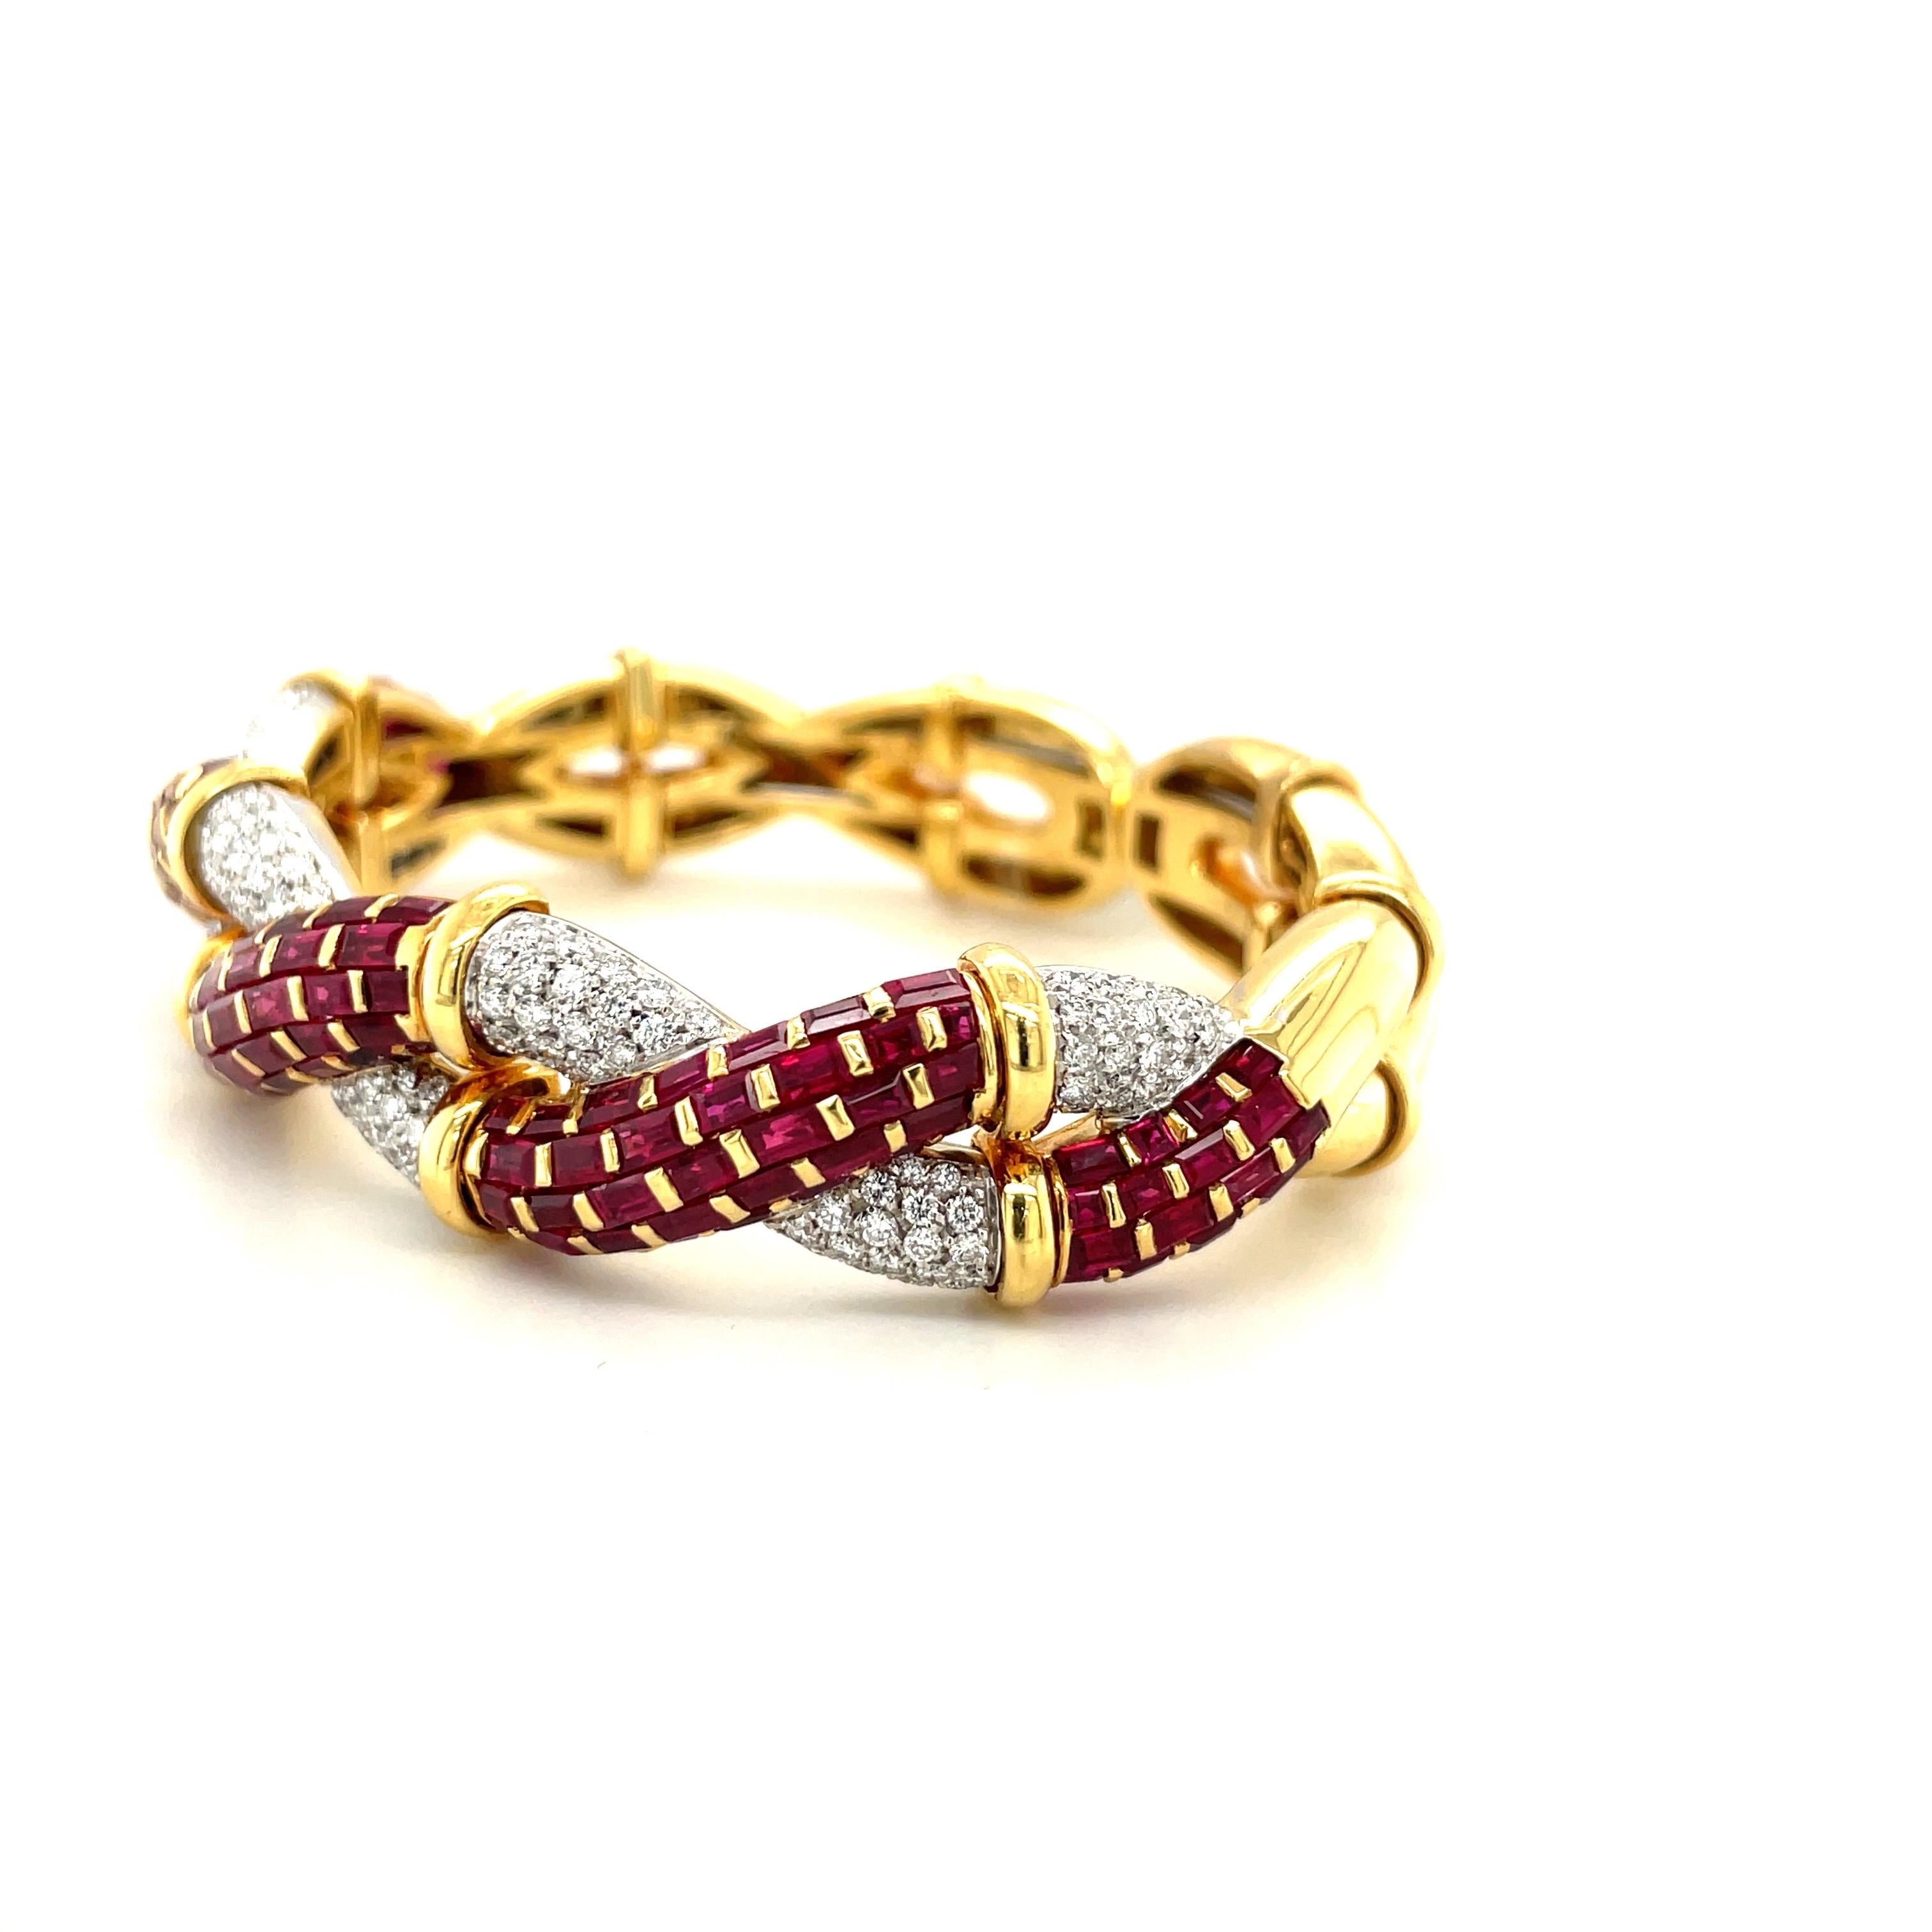 Founded in 1969 in Valenza, Italy , RCM is well known for their classic designs in modern appeal.
This bracelet is a perfect example of their unique styling.
The 18 karat yellow gold flexible bracelet is designed with pave Round Brilliant Diamonds